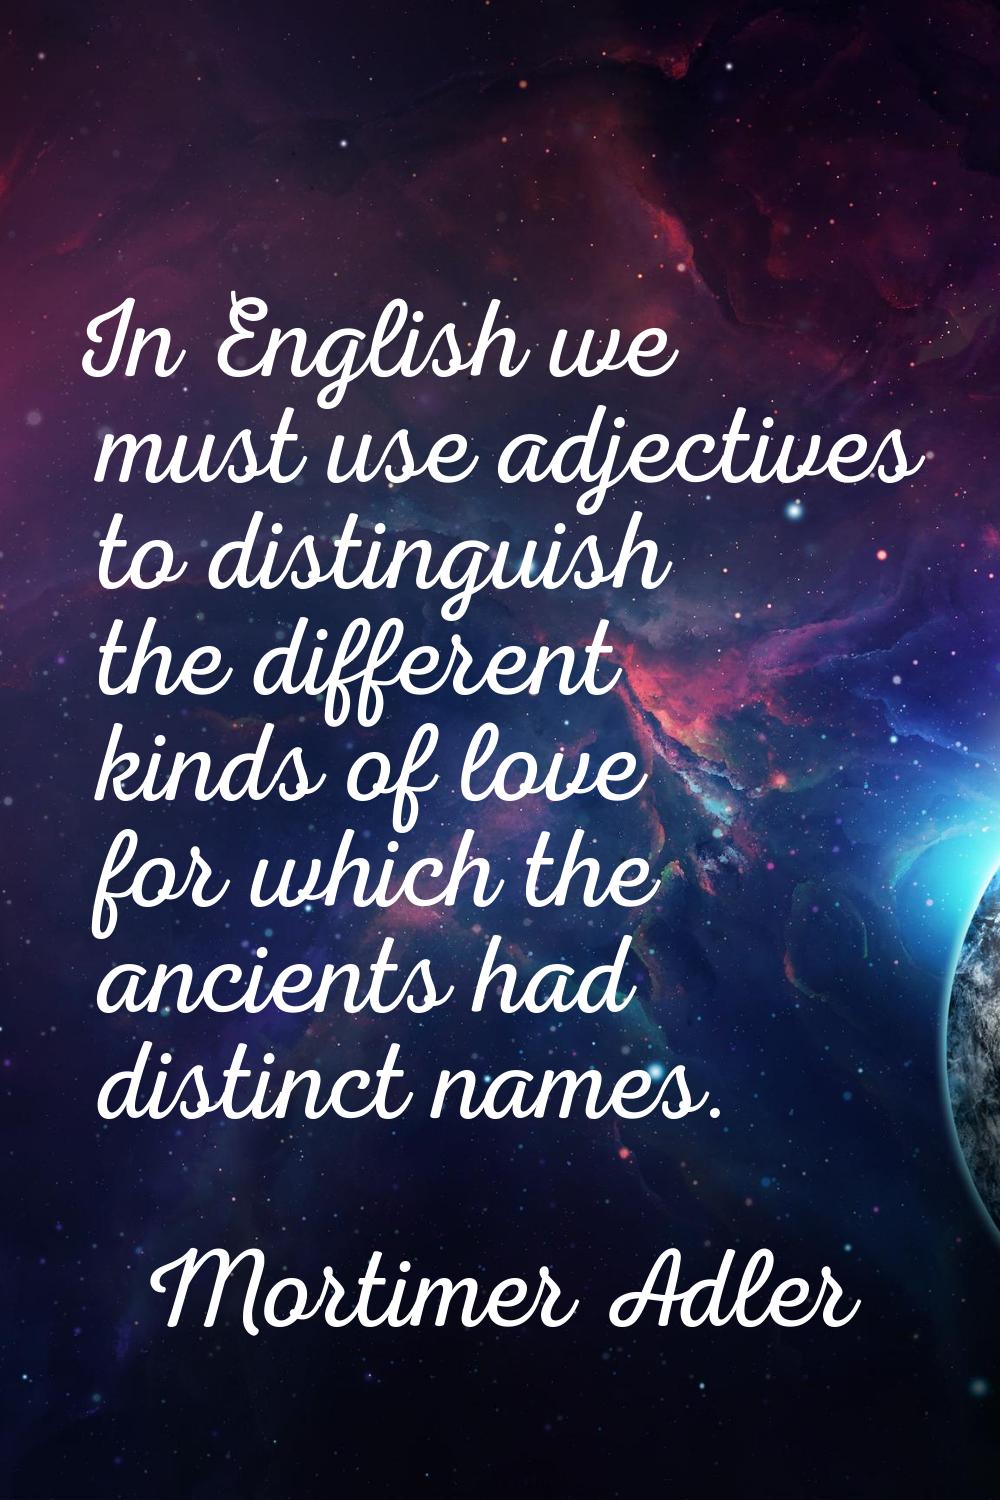 In English we must use adjectives to distinguish the different kinds of love for which the ancients